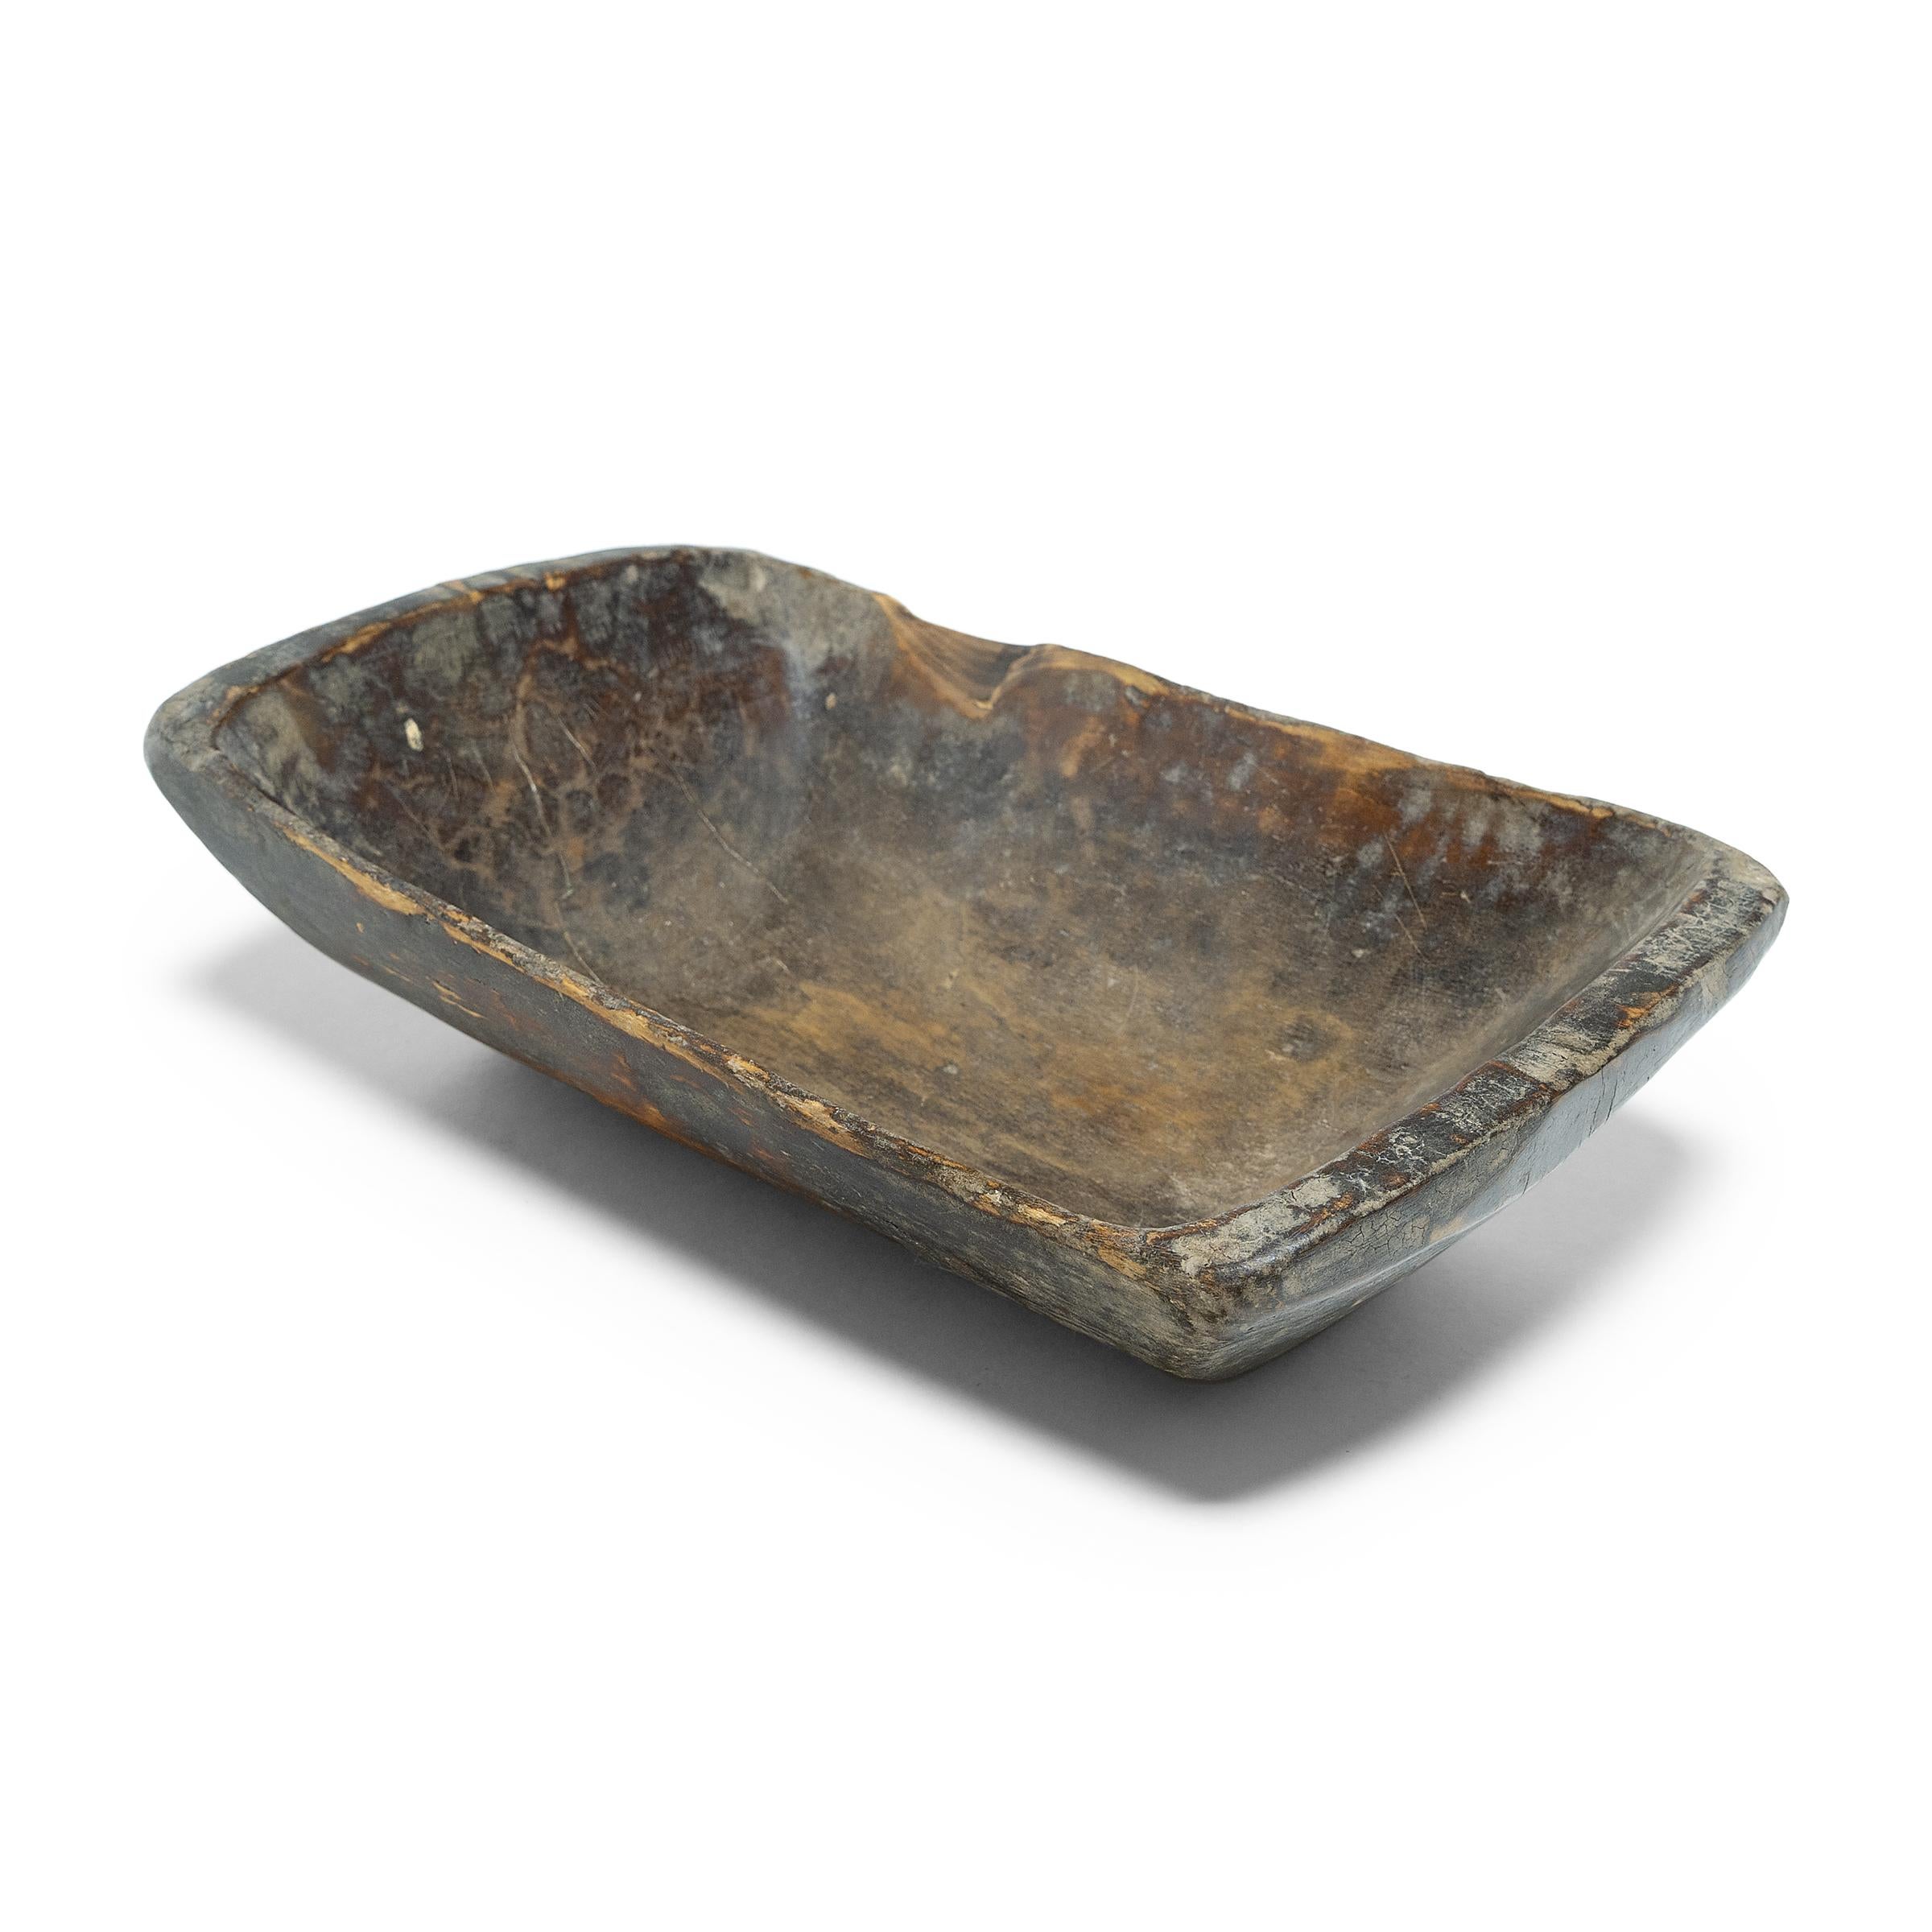 This wooden farm tray from northern China charms with its rustic finish and asymmetrical form. Hand-carved from a single block of wood, the tray is truly one-of-a-kind, shaped with a deep basin and tapered sides. The surface of the tray is faceted